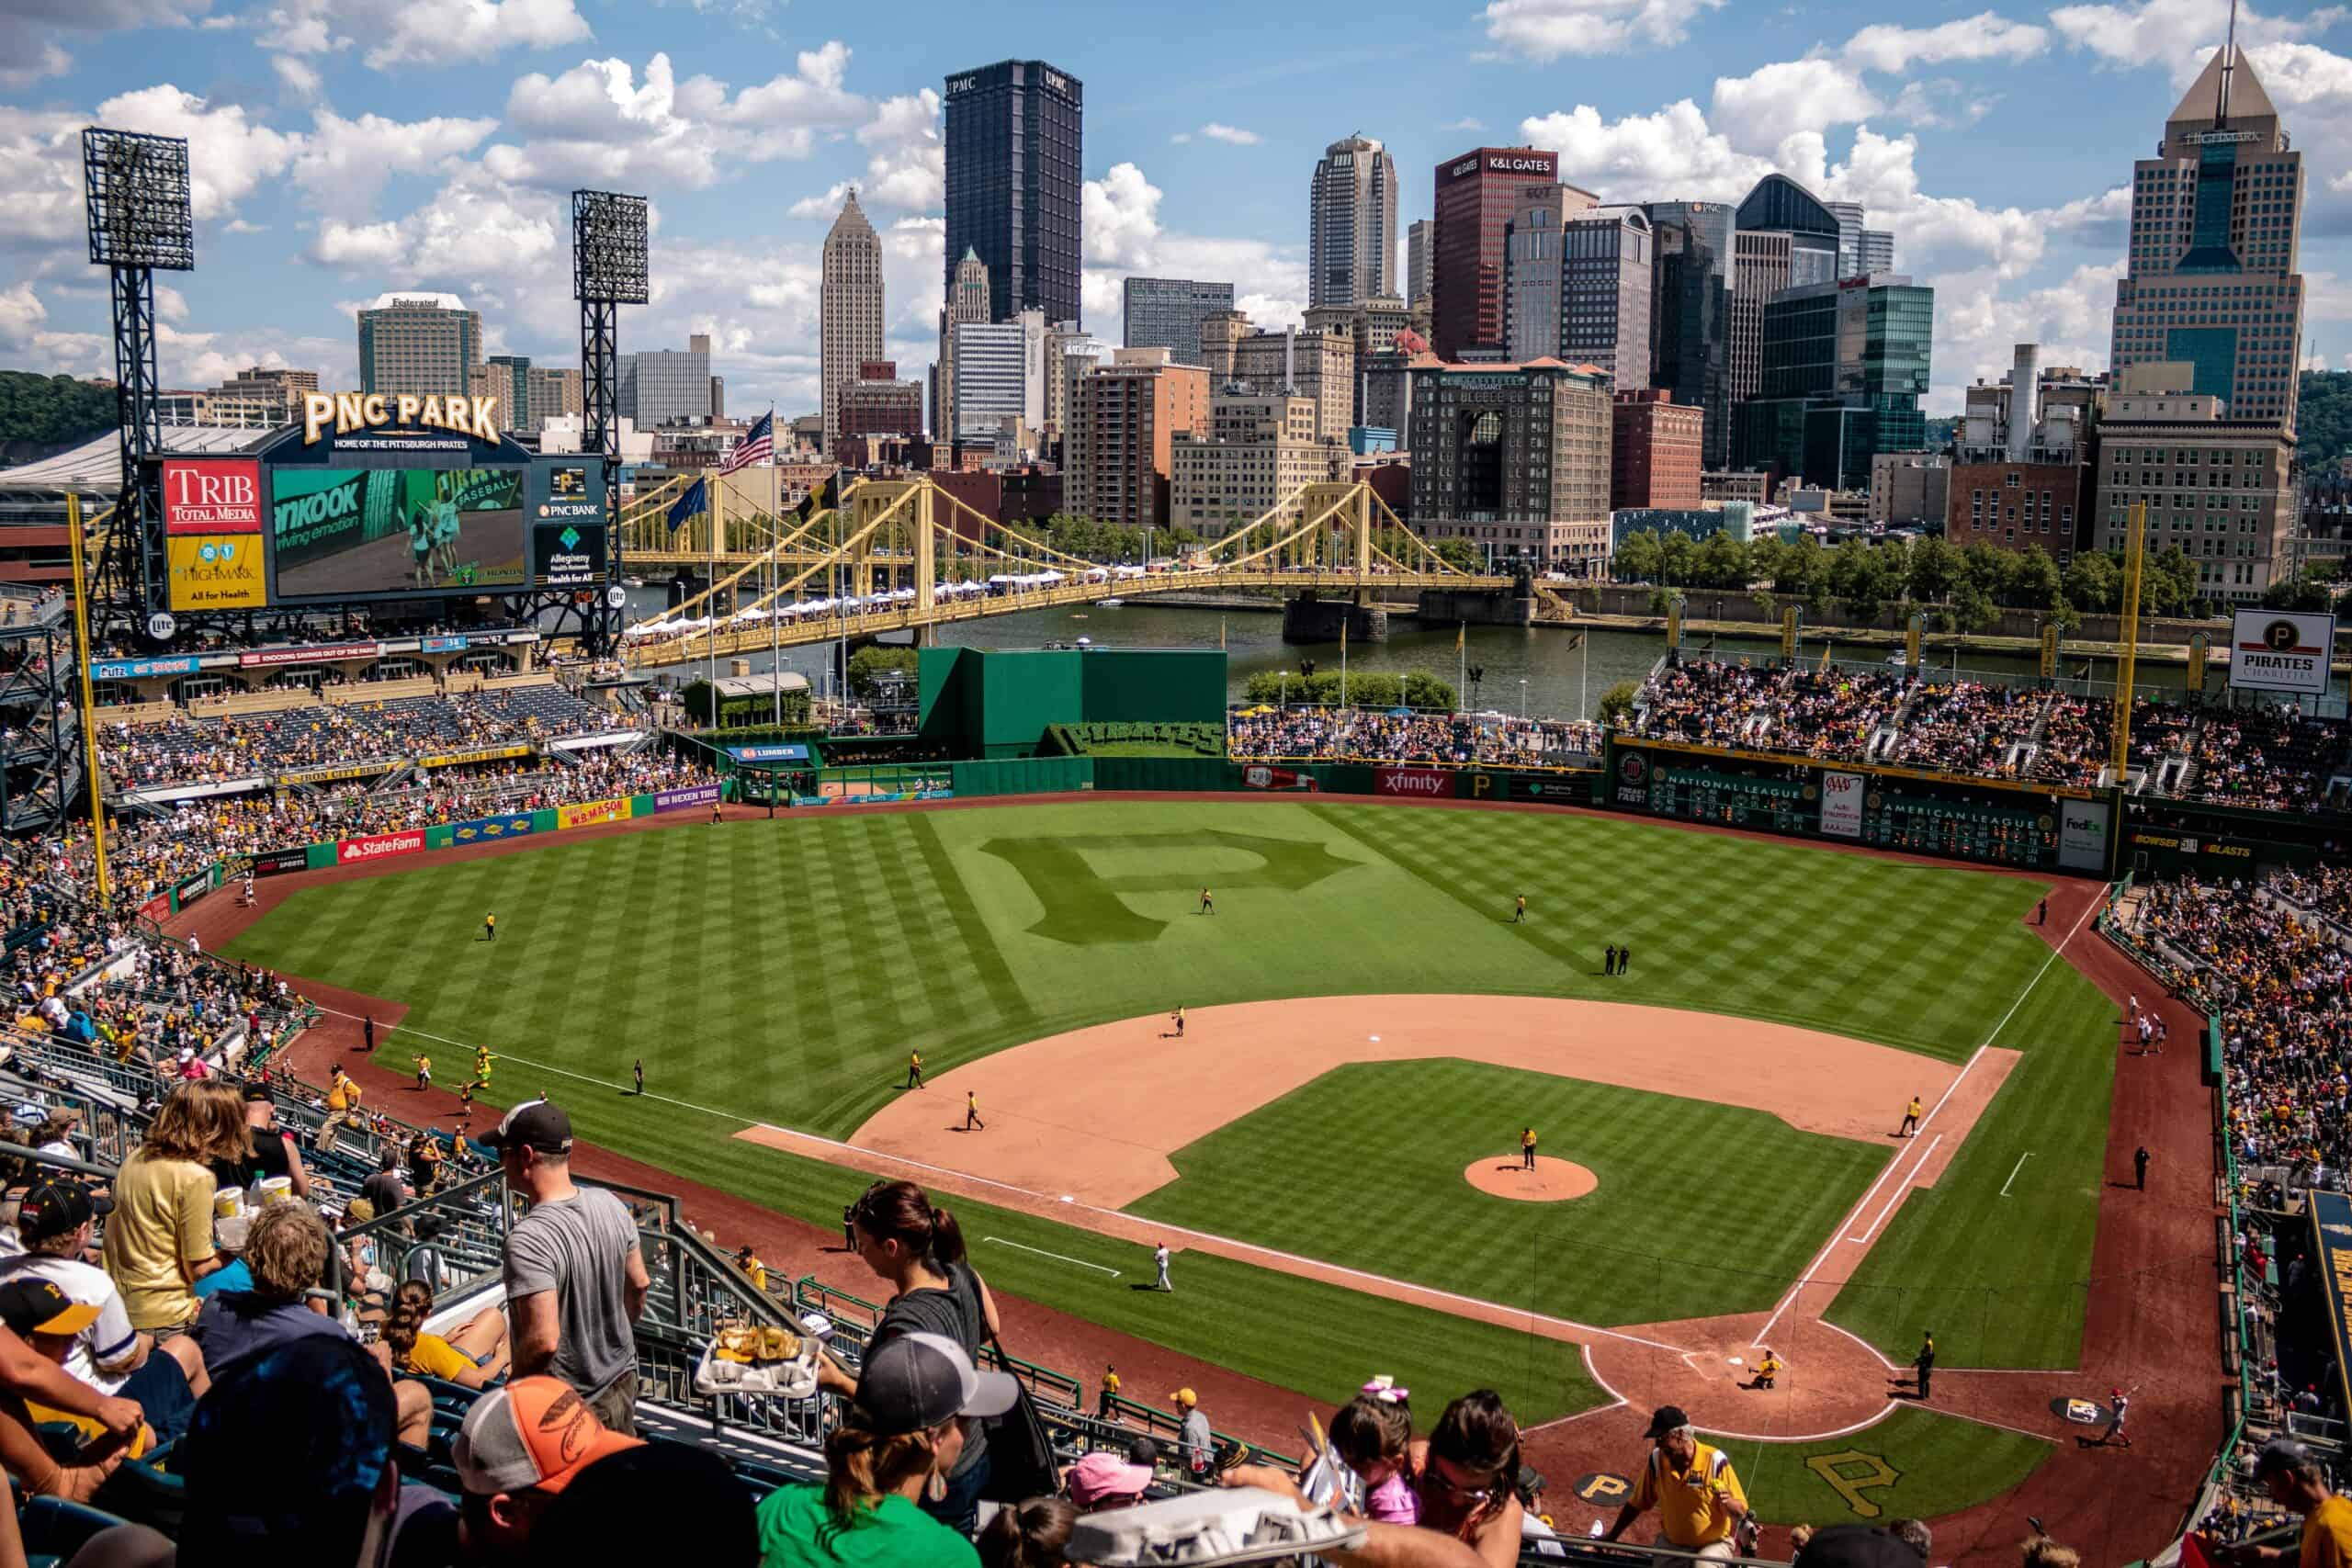 PNC park in Pittsburgh